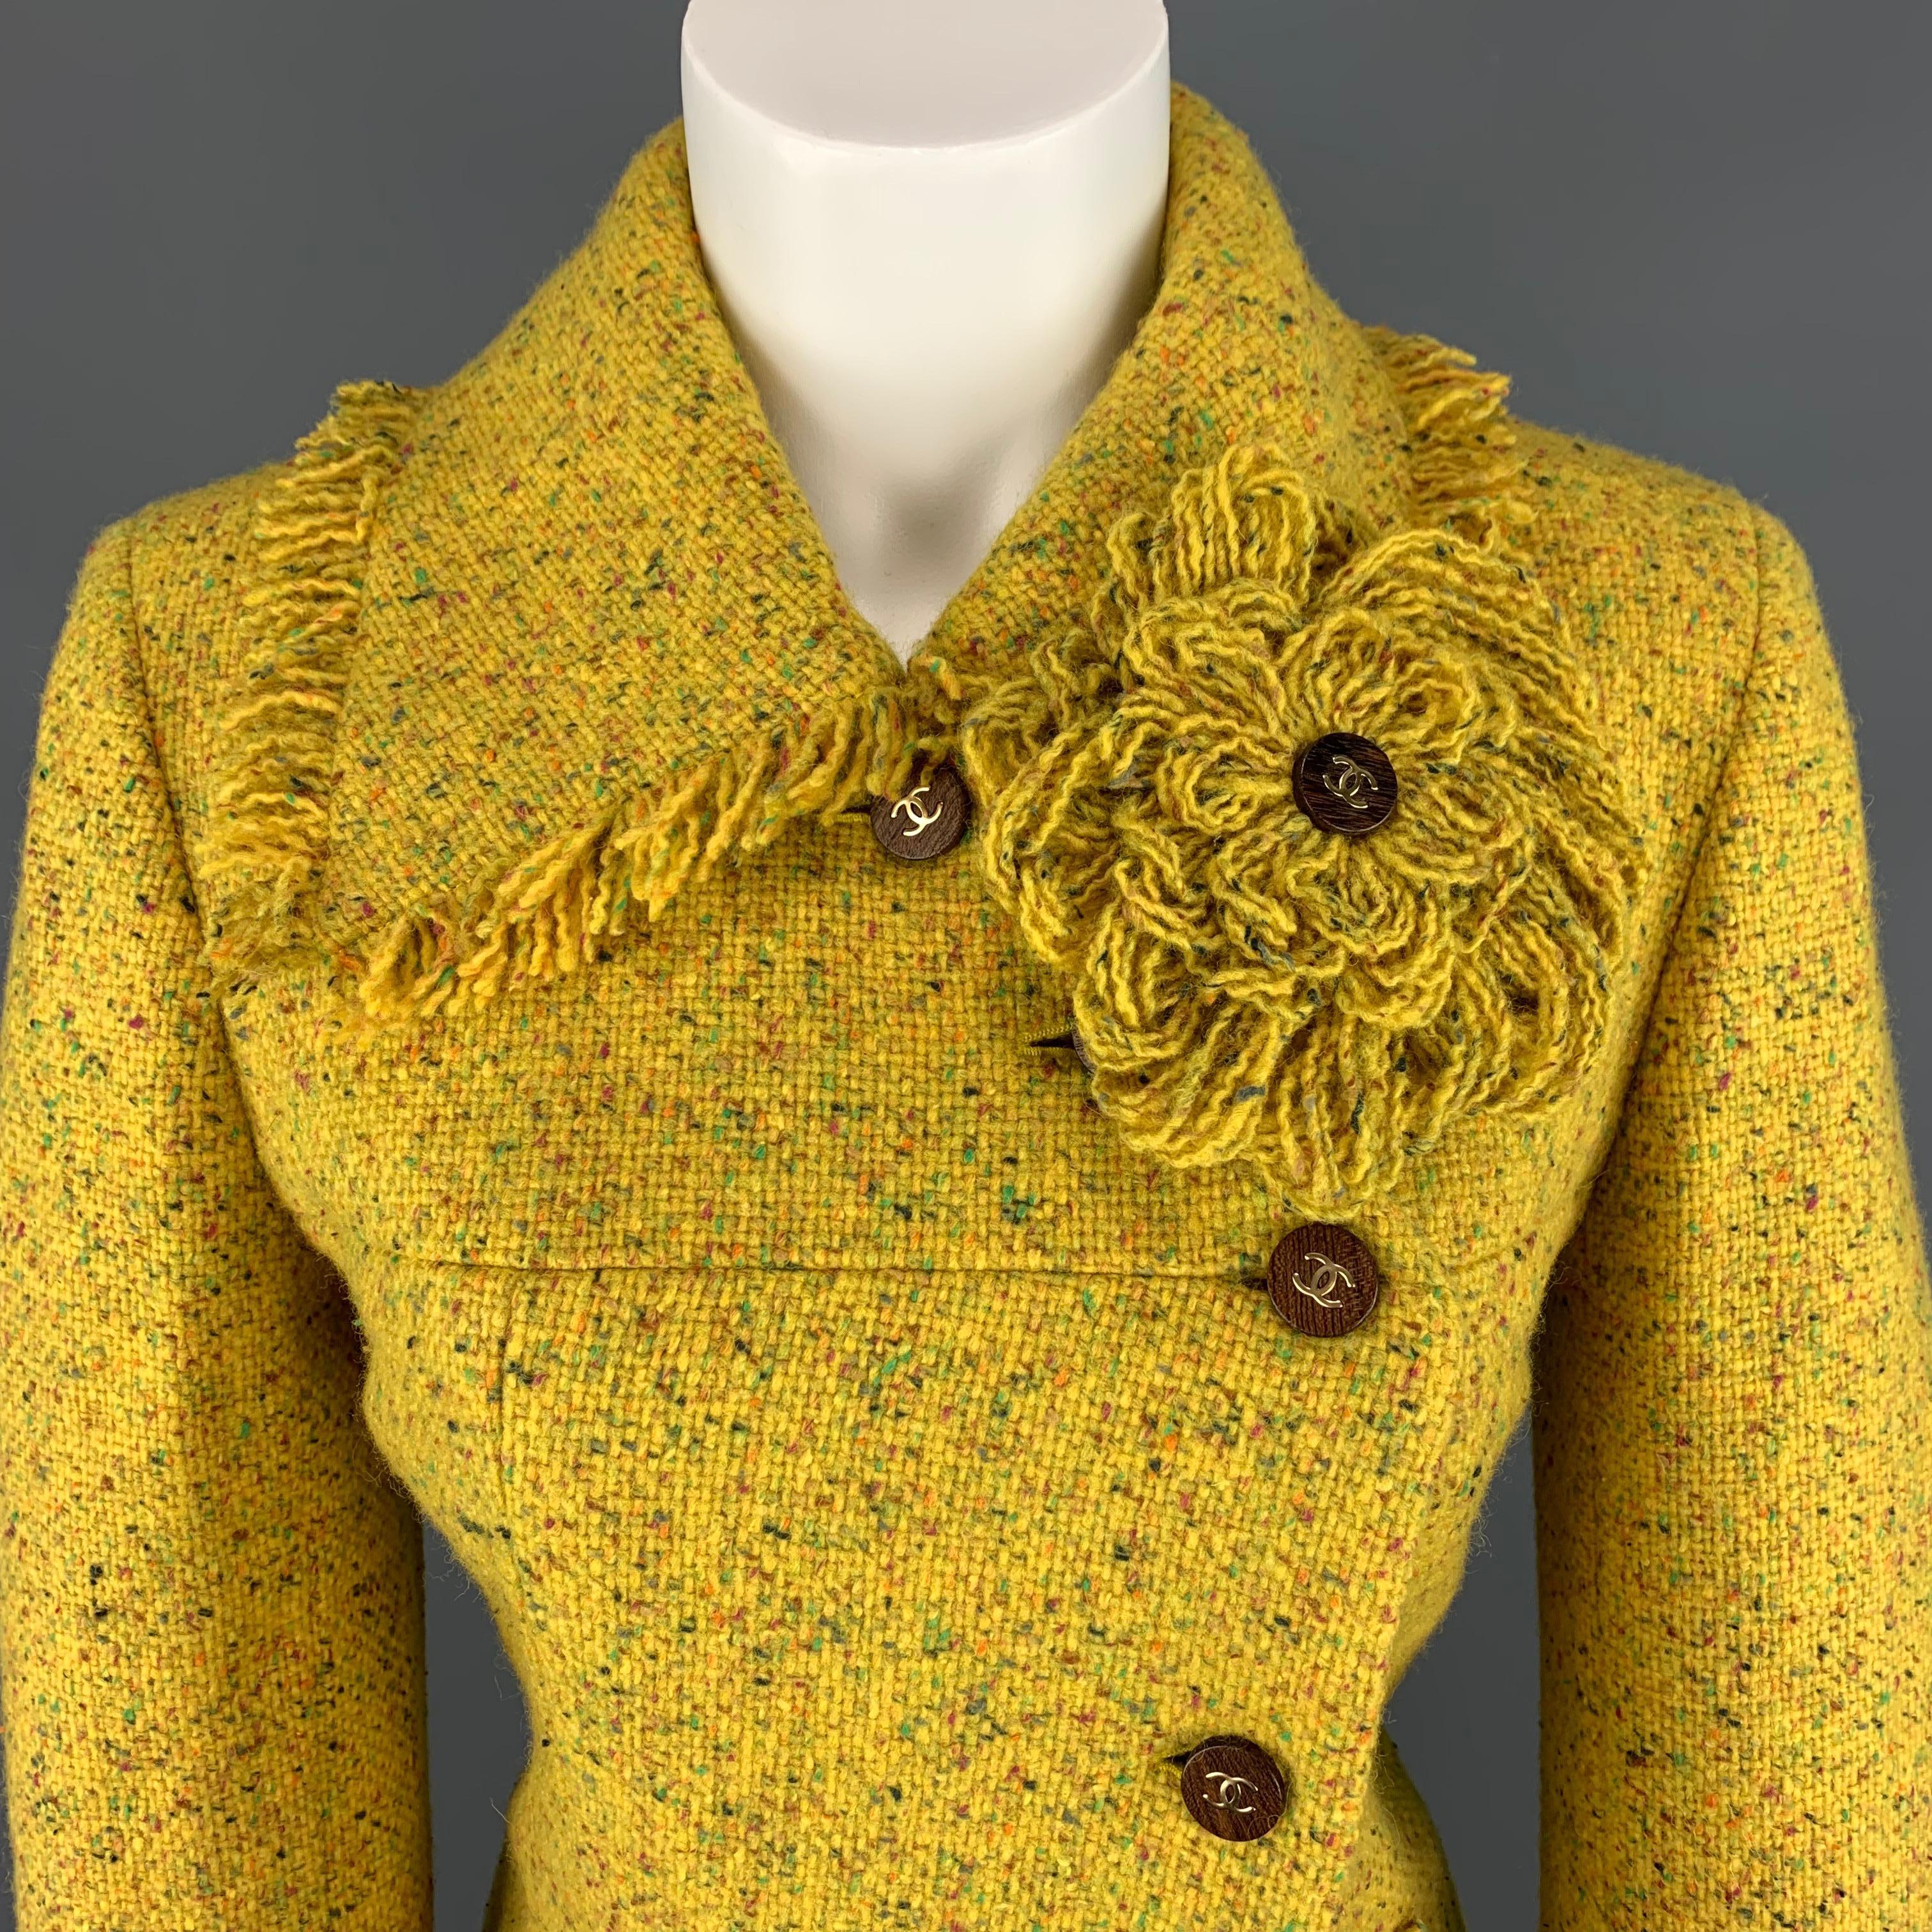 Archive circa 2001 CHANEL jacket comes in canary yellow wool blend tweed with multi color speckled pattern throughout and features a pointed collar with fringe trim, tweed flower brooch, asymmetrical closure with wooden CC buttons, slit pockets,